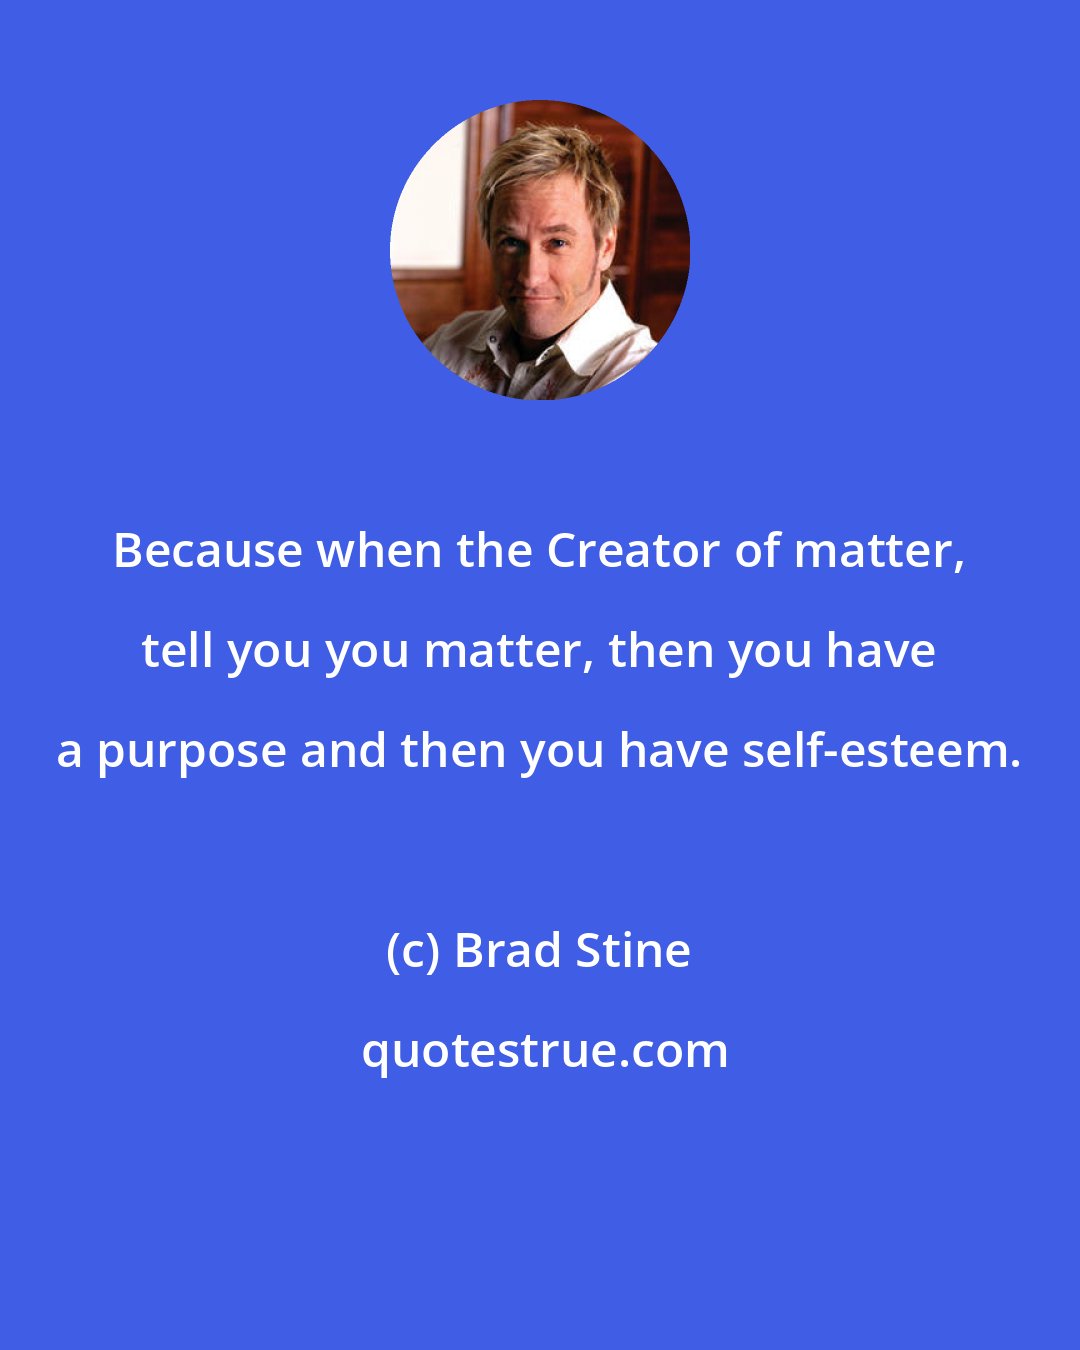 Brad Stine: Because when the Creator of matter, tell you you matter, then you have a purpose and then you have self-esteem.